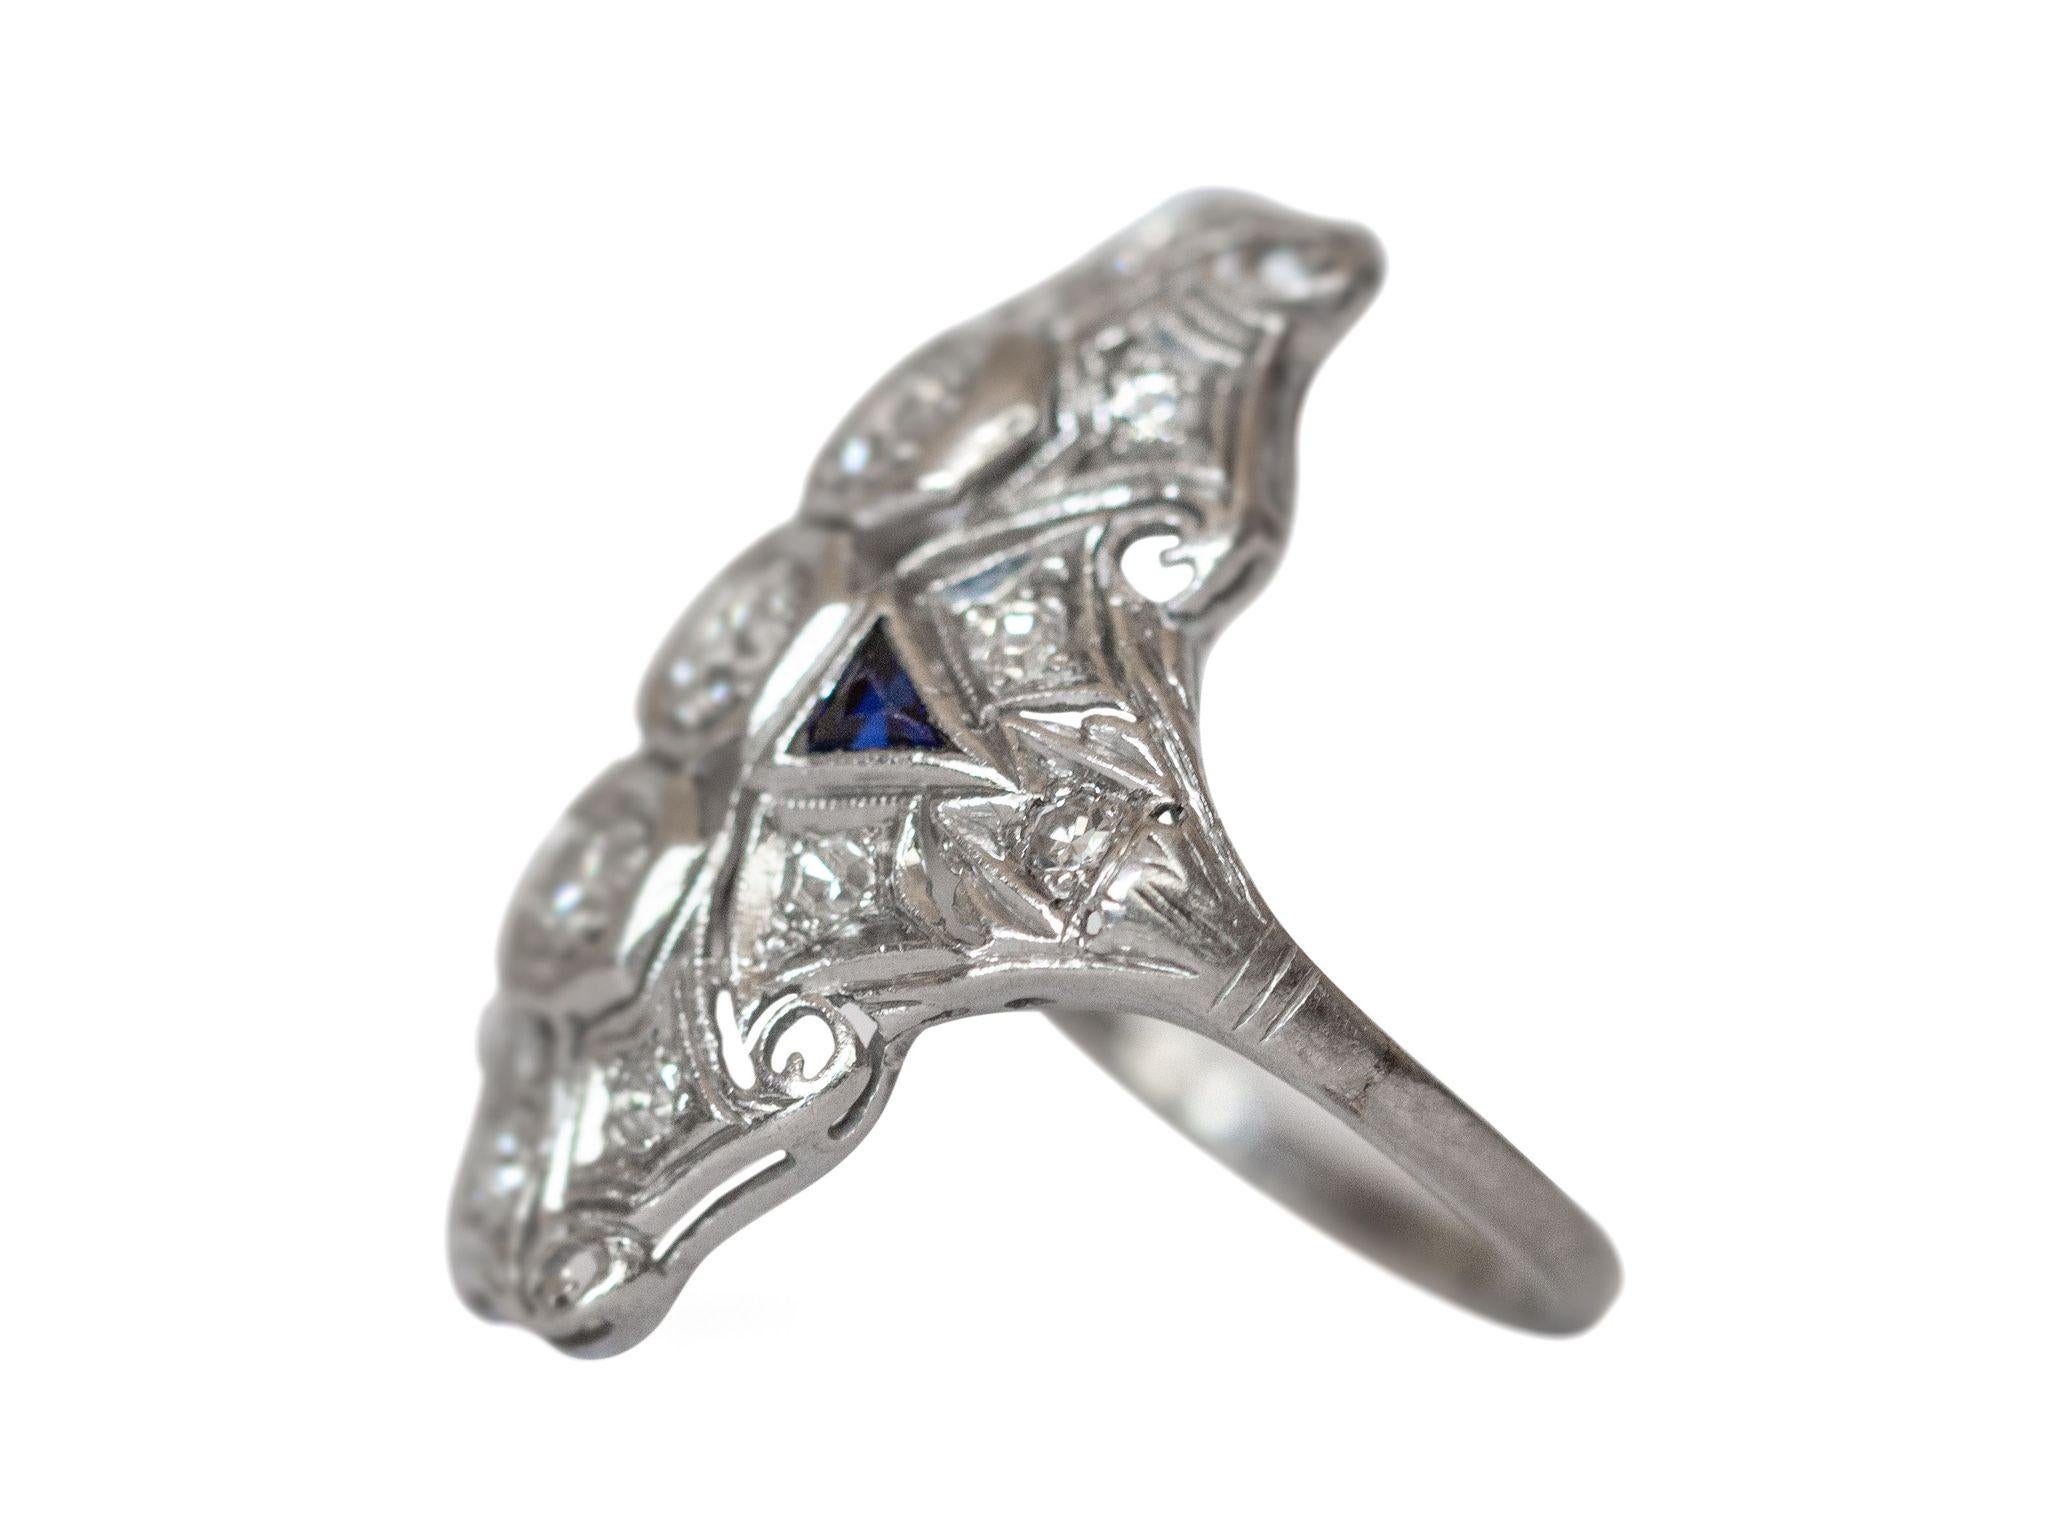 This lovely example of an Art Deco shield ring is crafted of stunning platinum. Intricate filigree designs surround 3 sparkling diamonds on this vintage beauty. Two sapphire pyramids add a pop of color that adds to this already beautiful piece. This